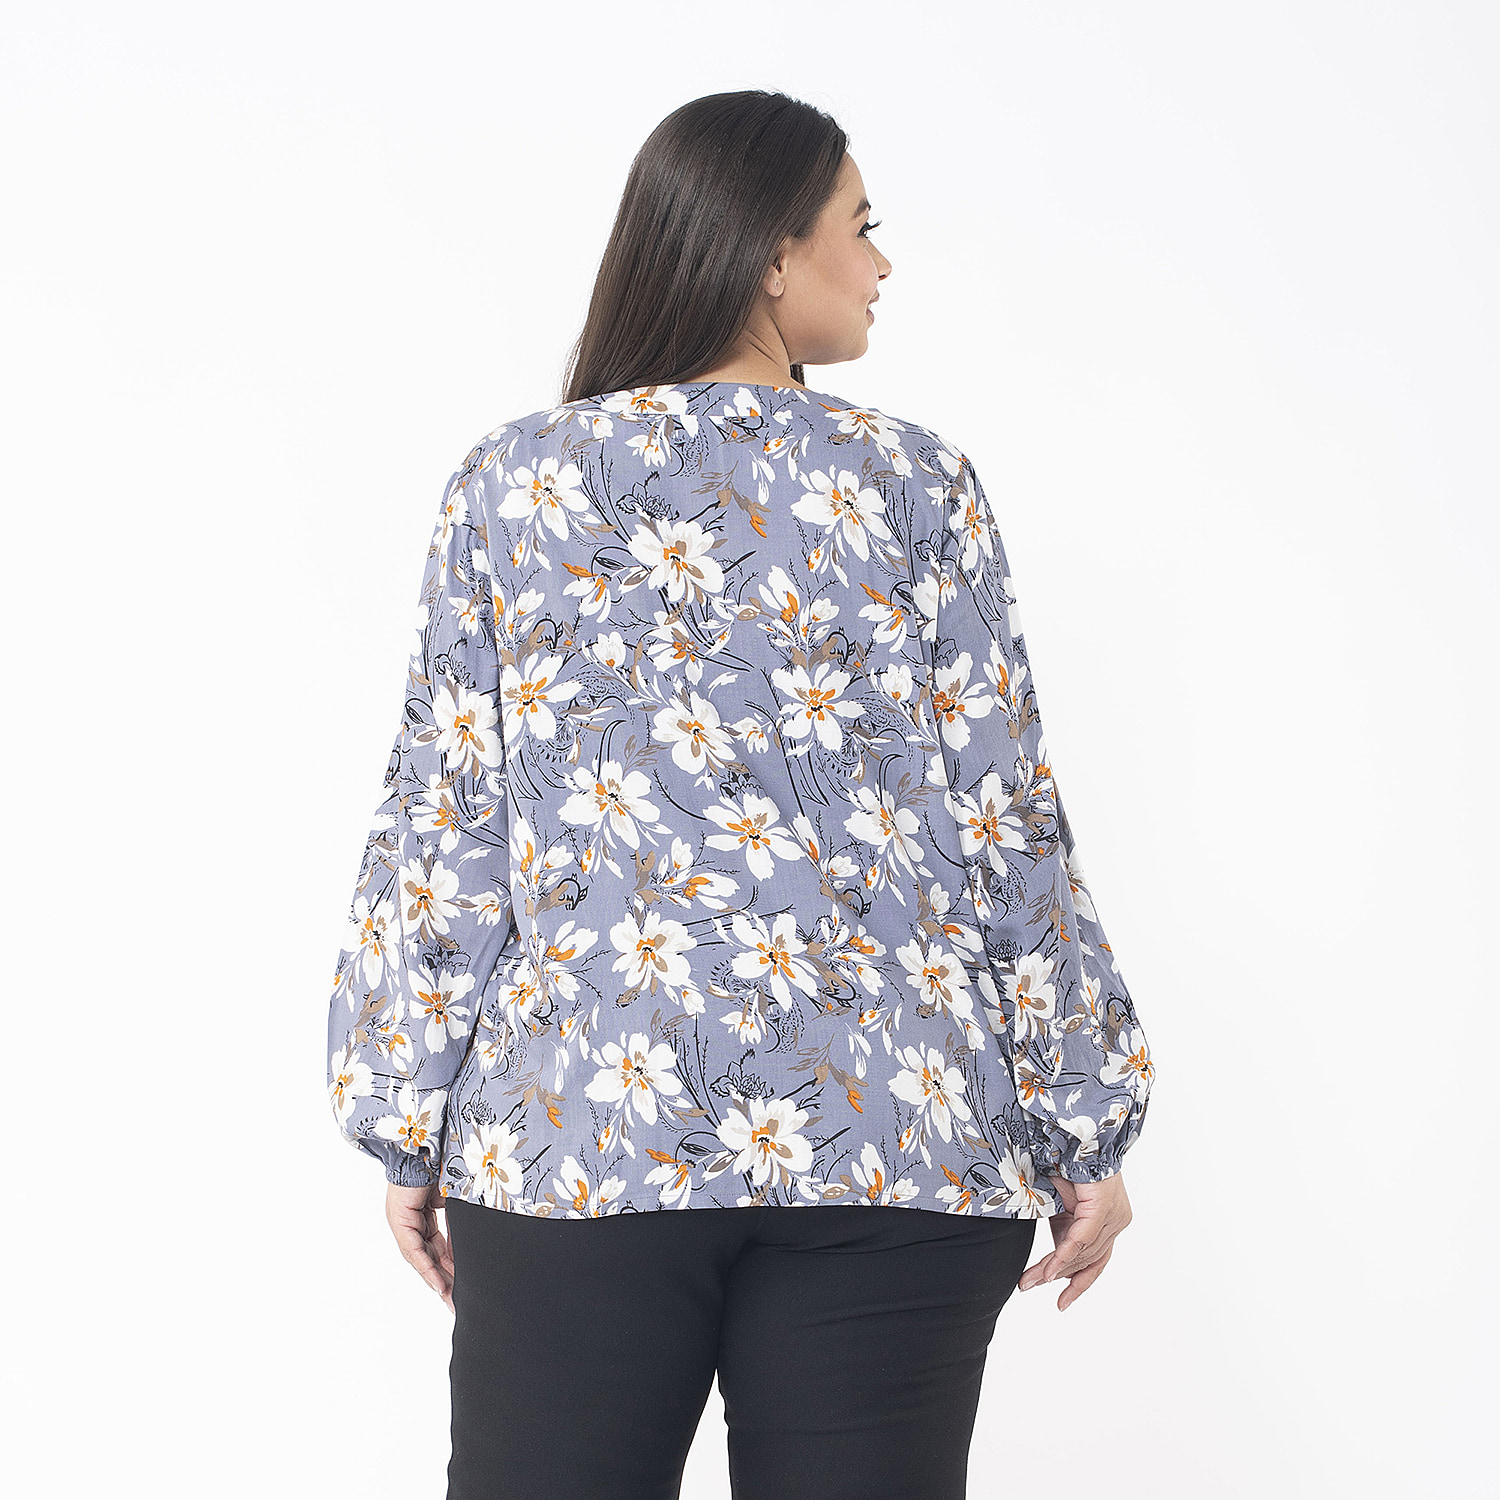 TAMSY 100% Viscose Floral Printed V Neck Full Sleeve Top with Elastic at Cuffs (Size M, 12-14) - Grey